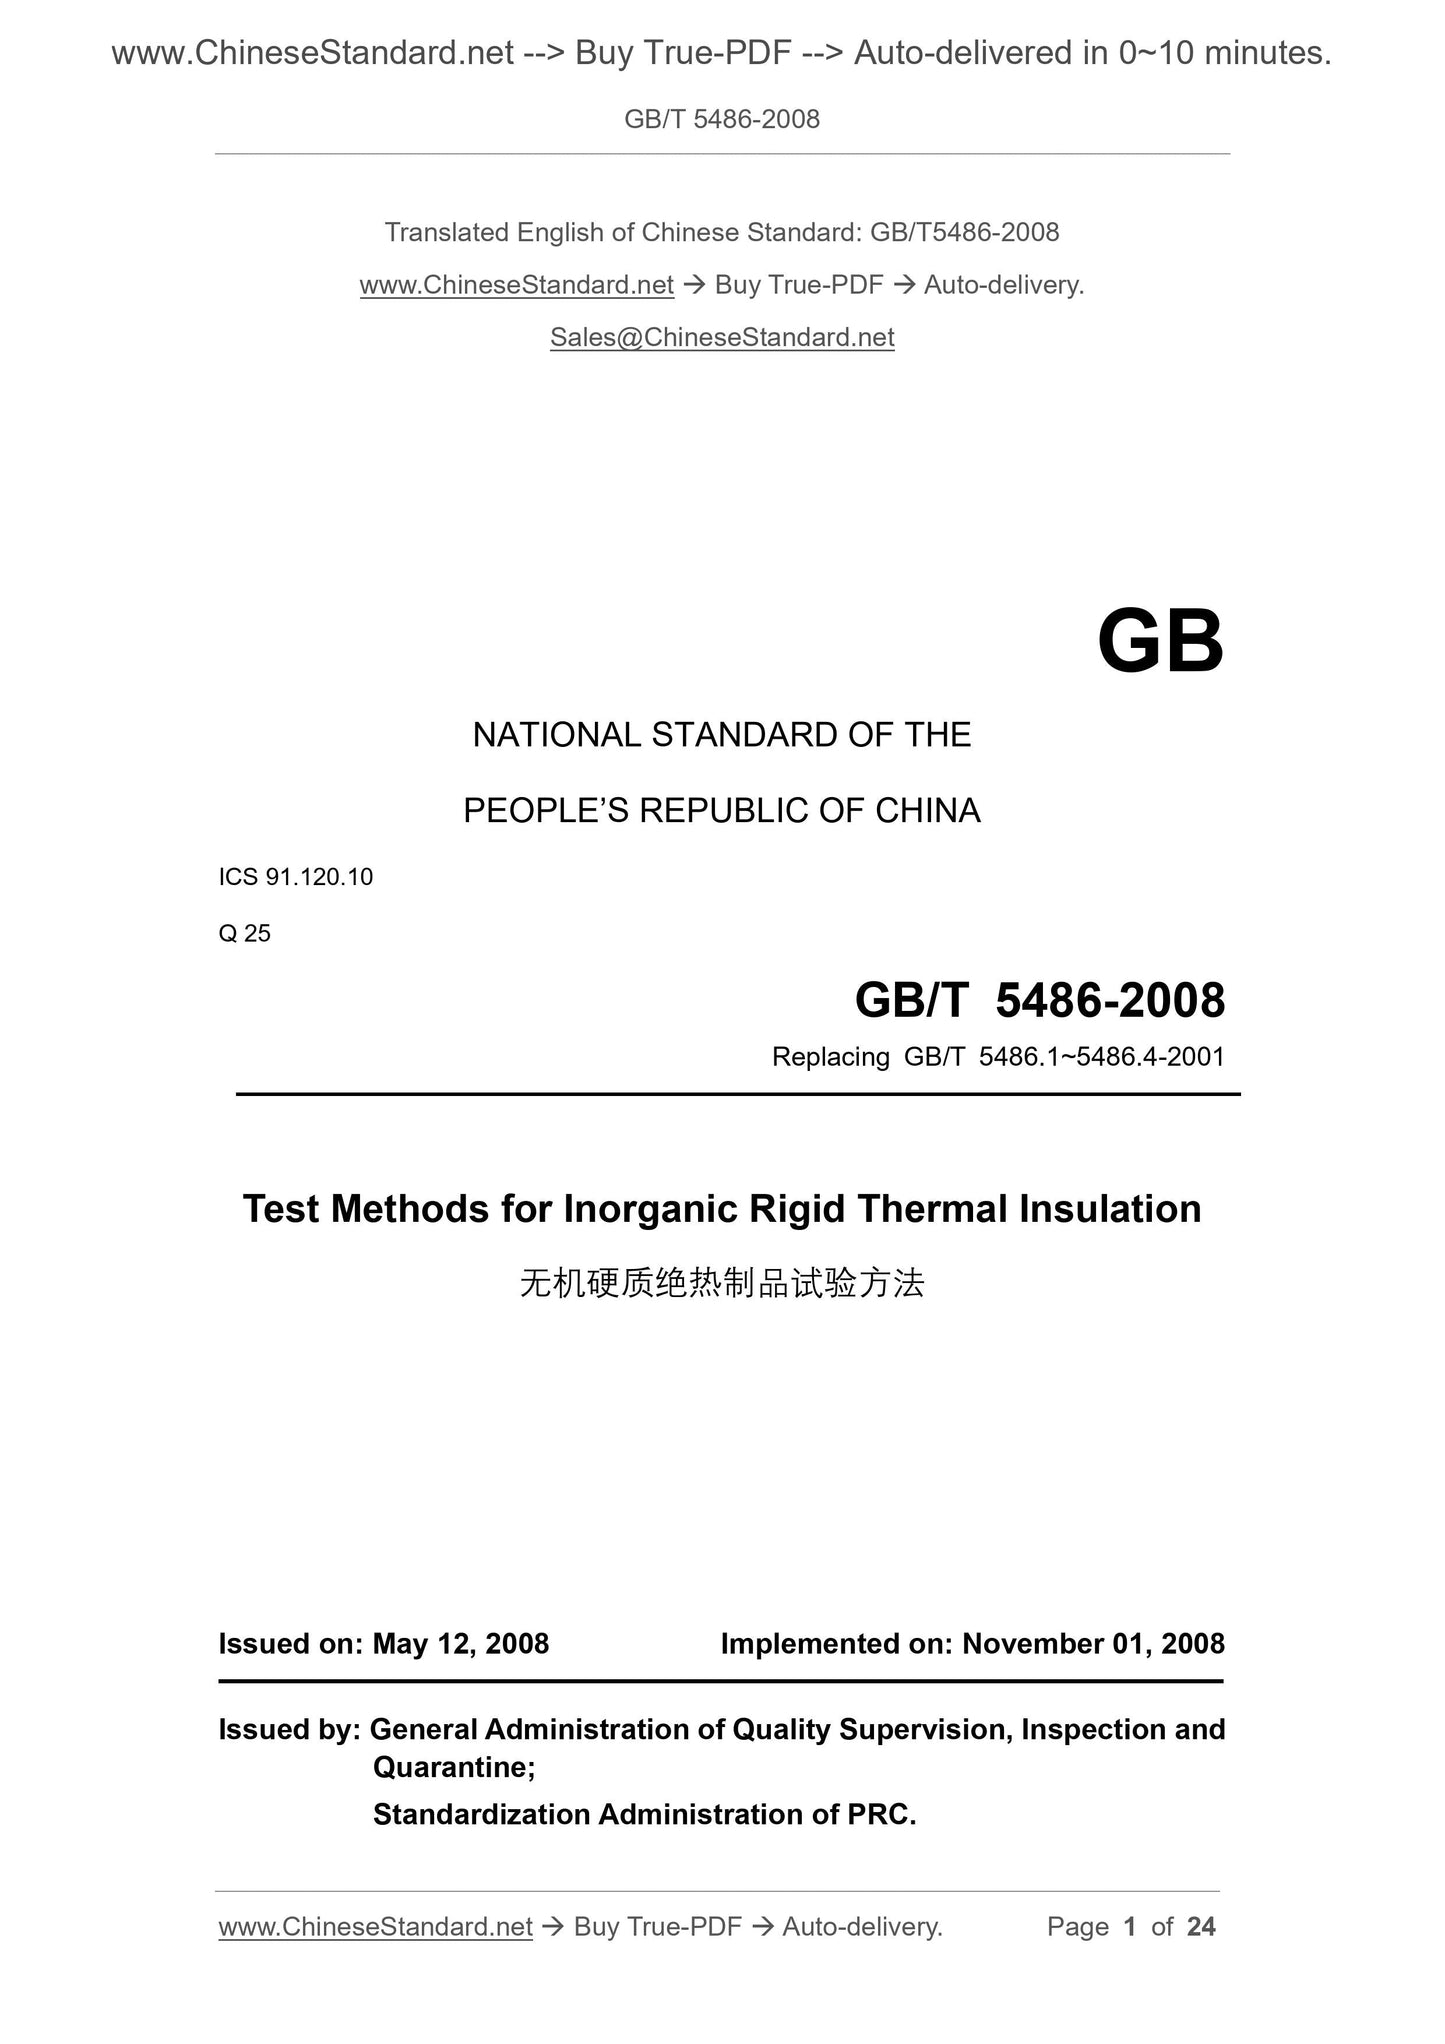 GB/T 5486-2008 Page 1